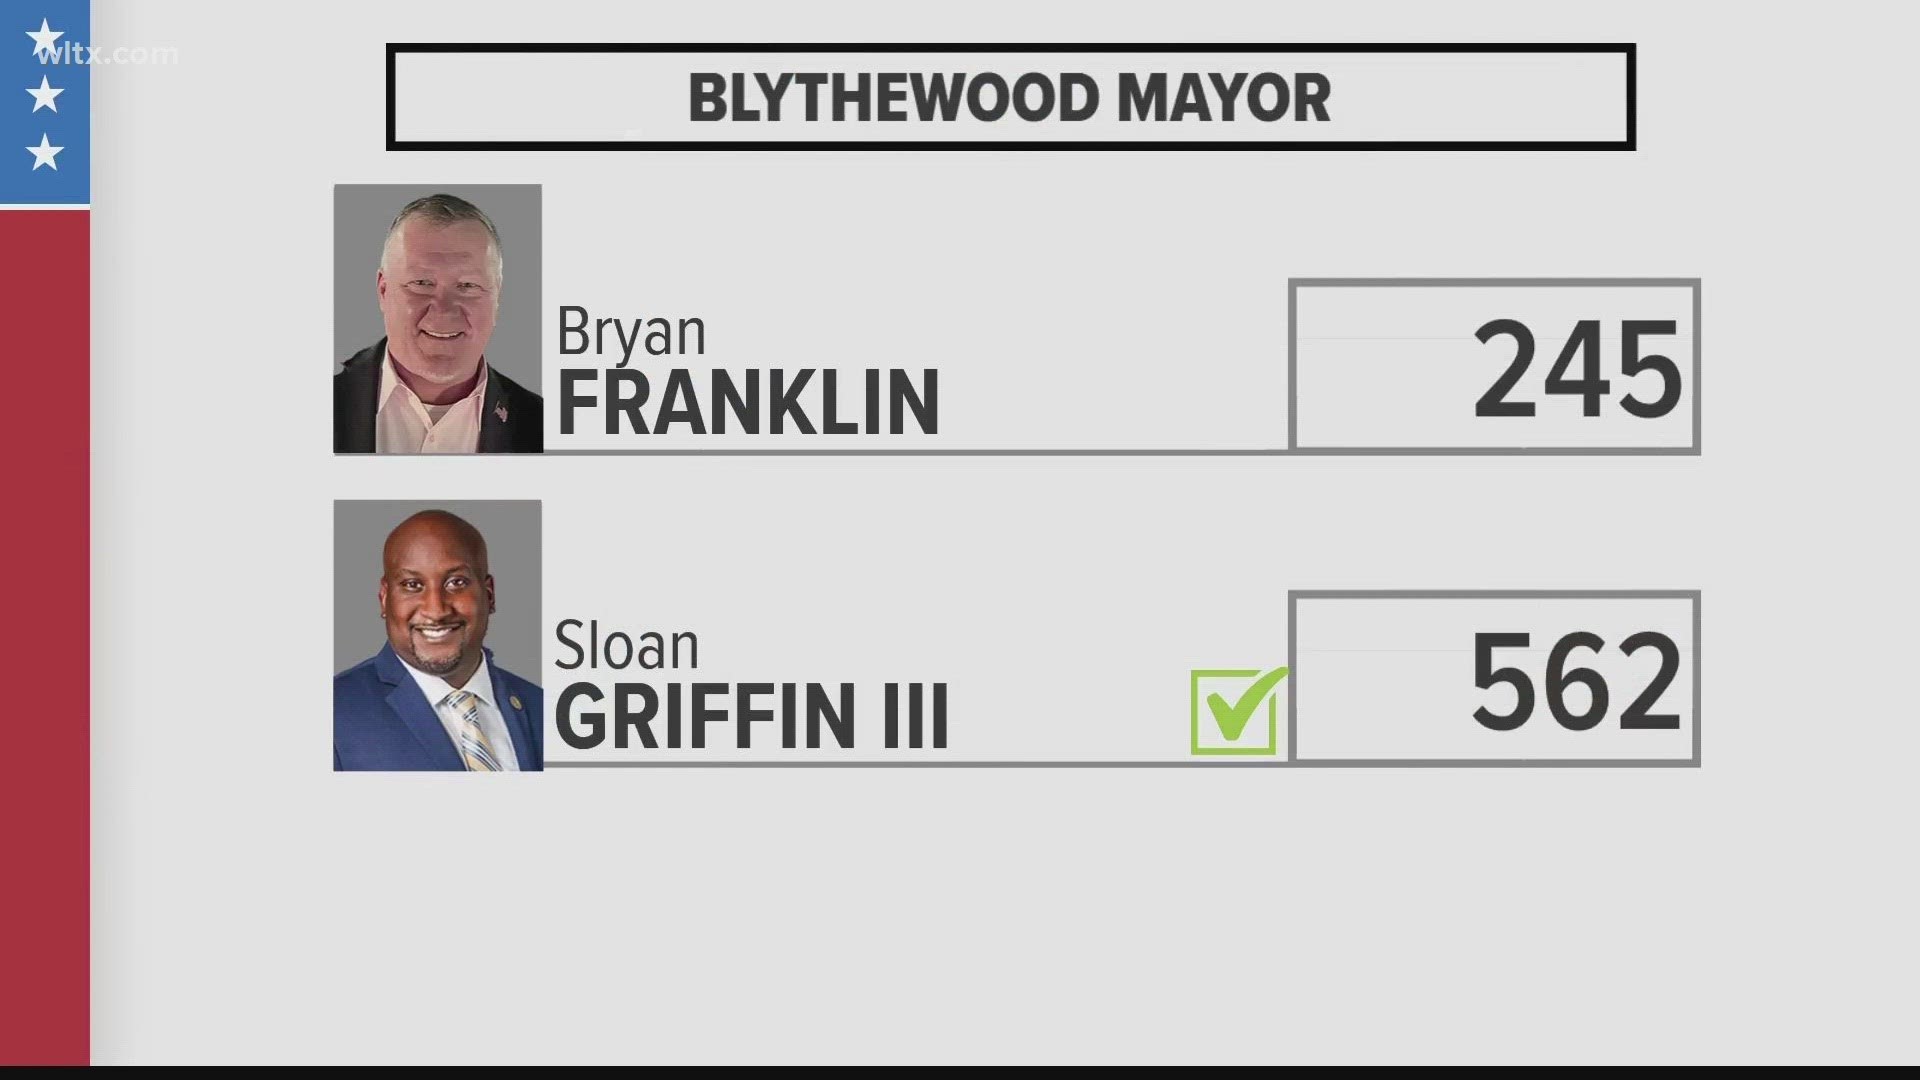 Voters elected a new mayor and town council members.